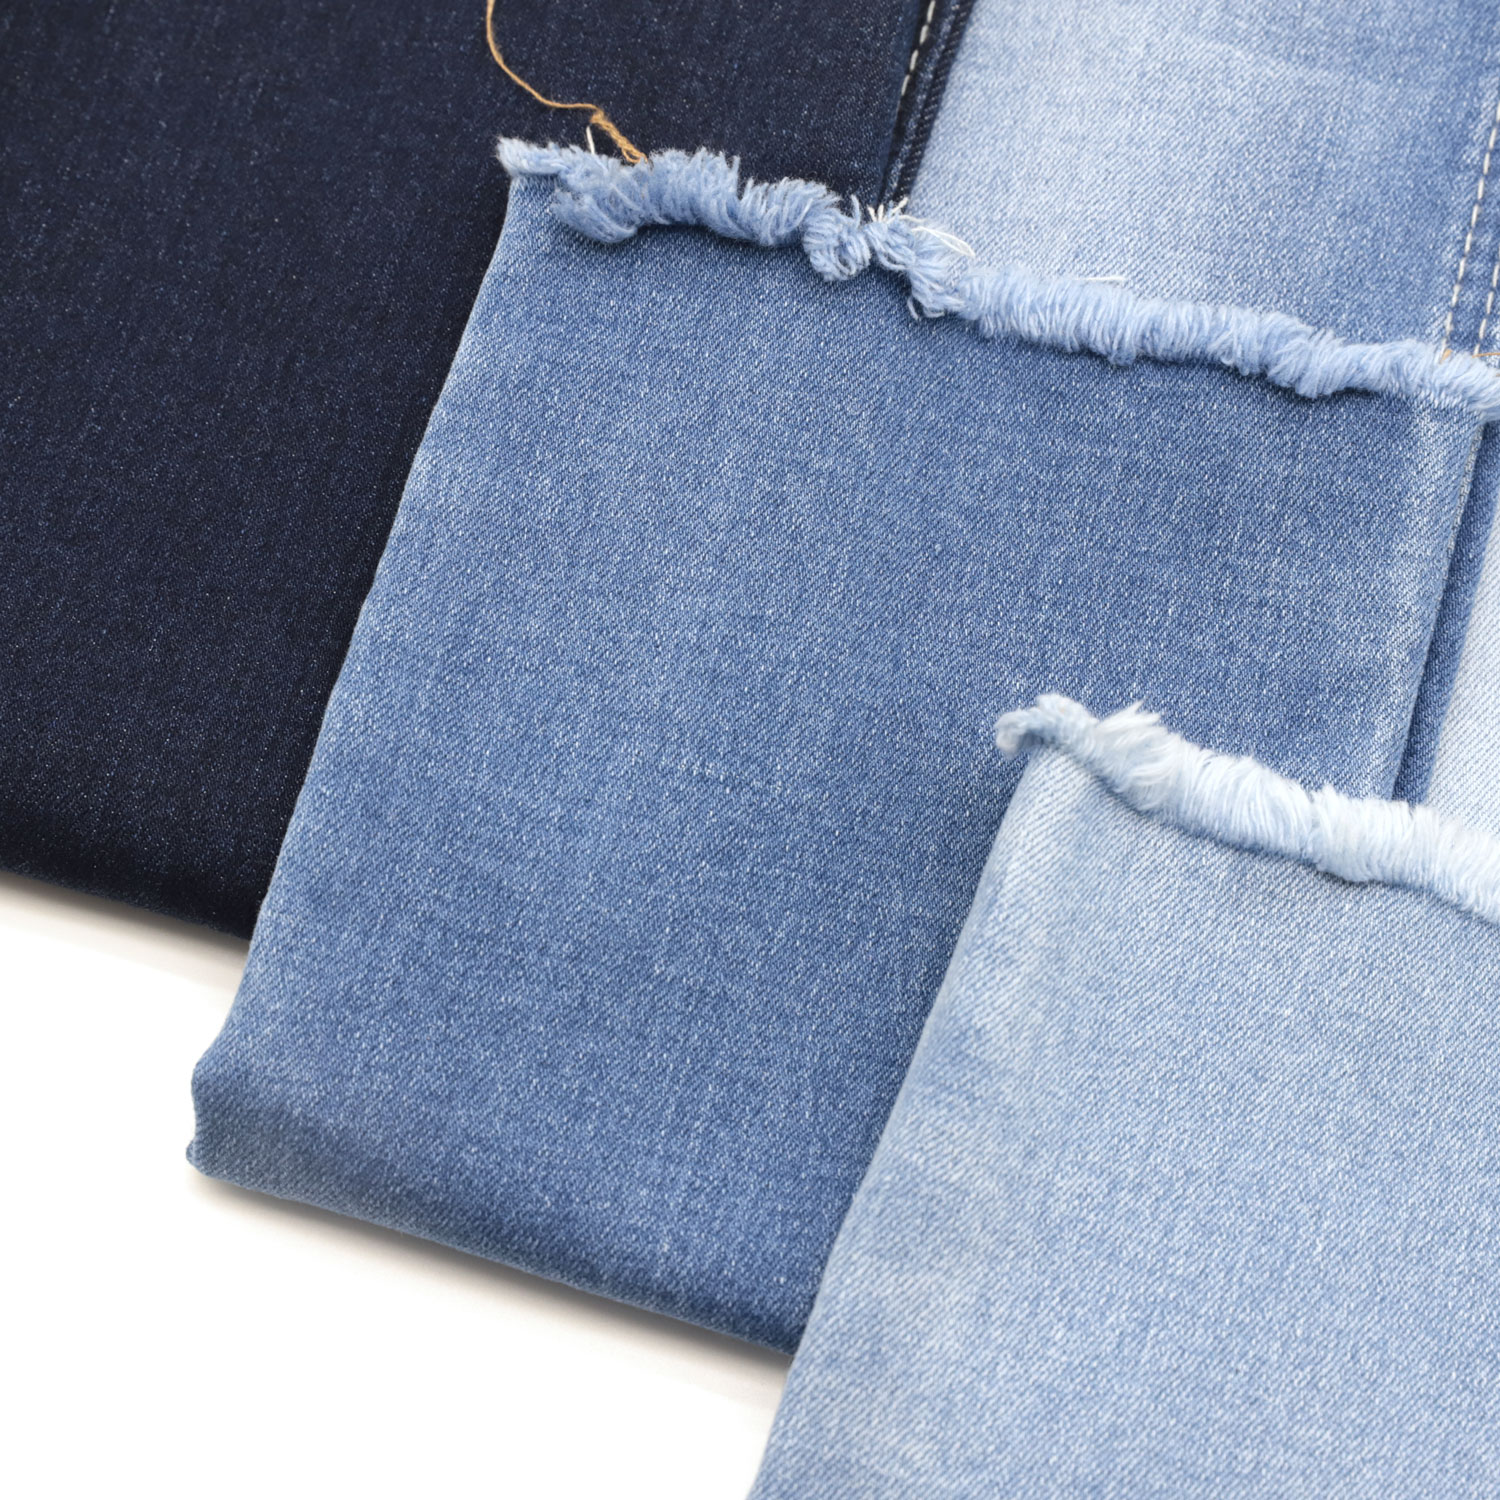 The Maximum Water Saving Is 99%, Which still Ensures the Aging Effect of Denim 1